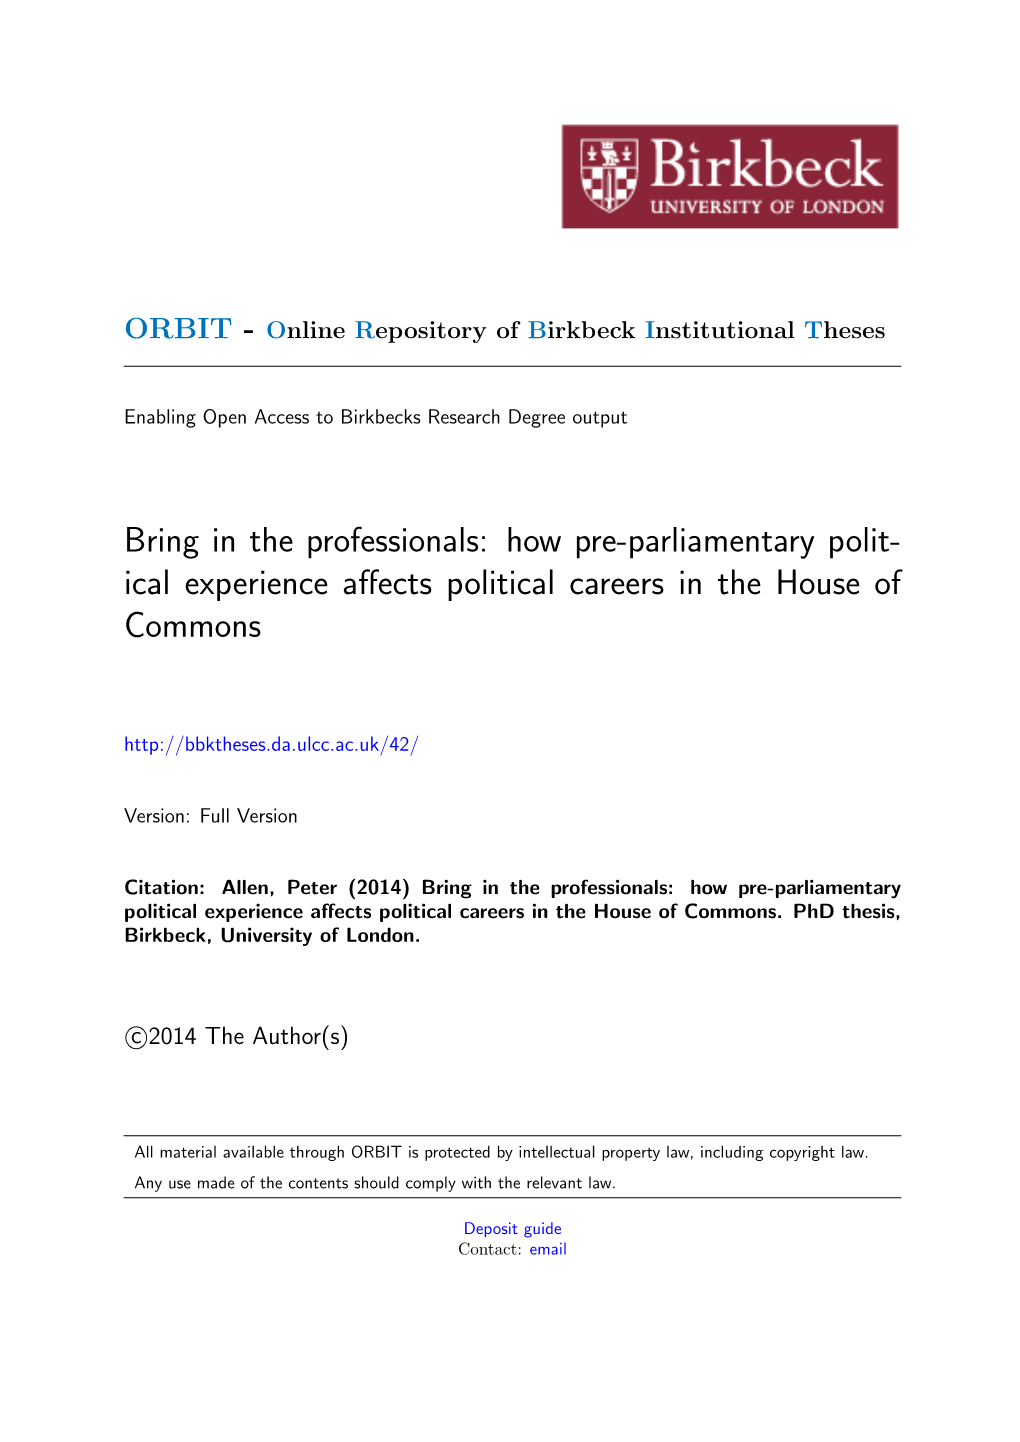 Ical Experience Affects Political Careers in the House of Commons